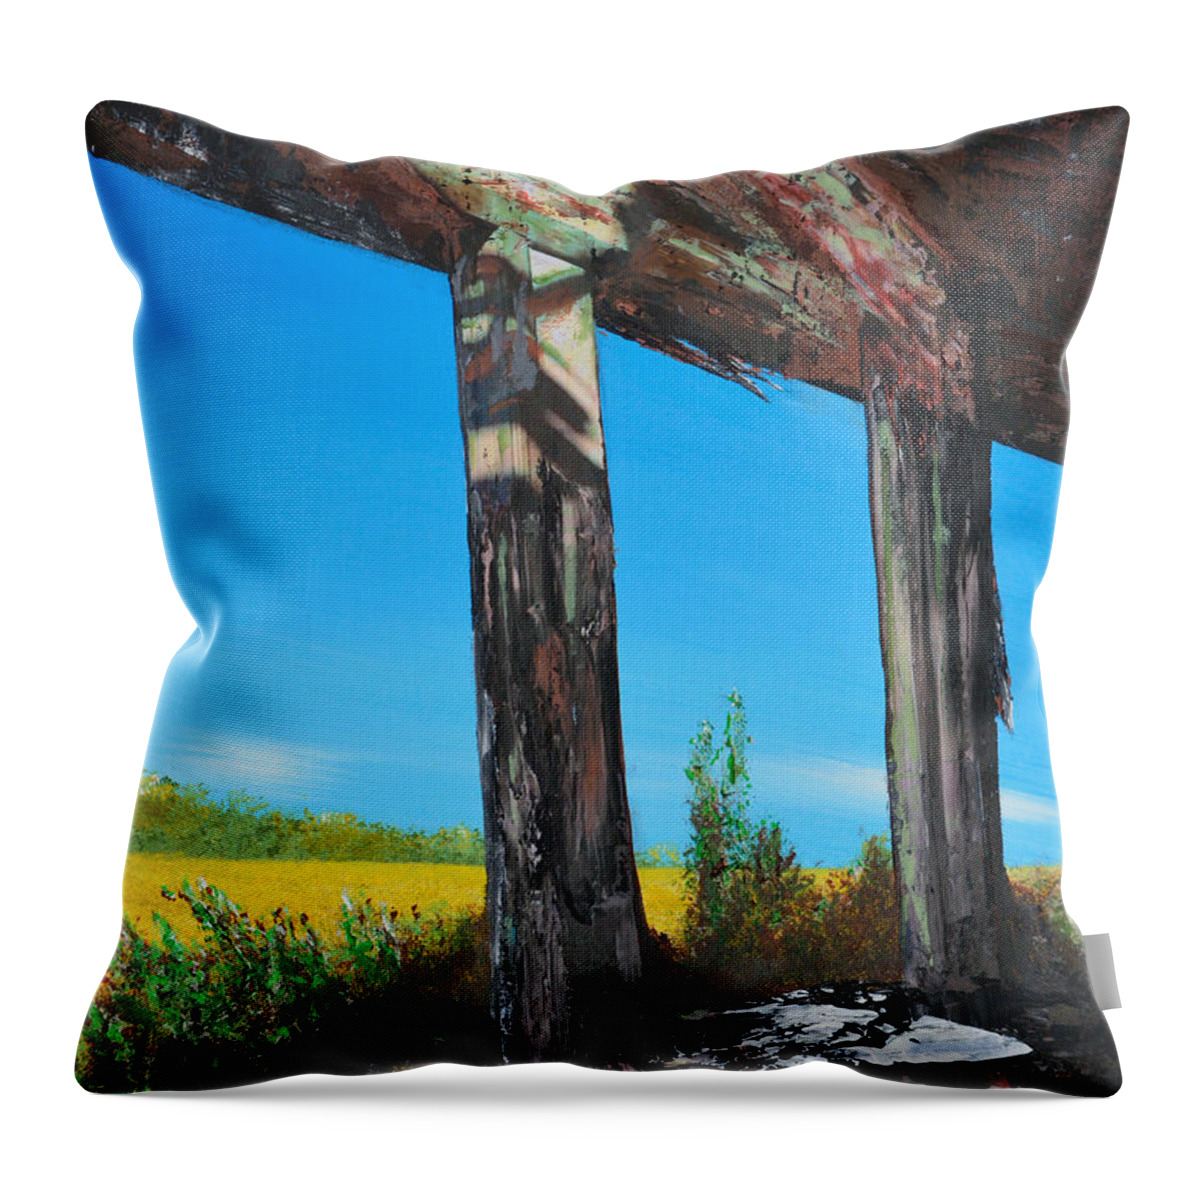 Abandoned Throw Pillow featuring the painting Abandoned by Alys Caviness-Gober